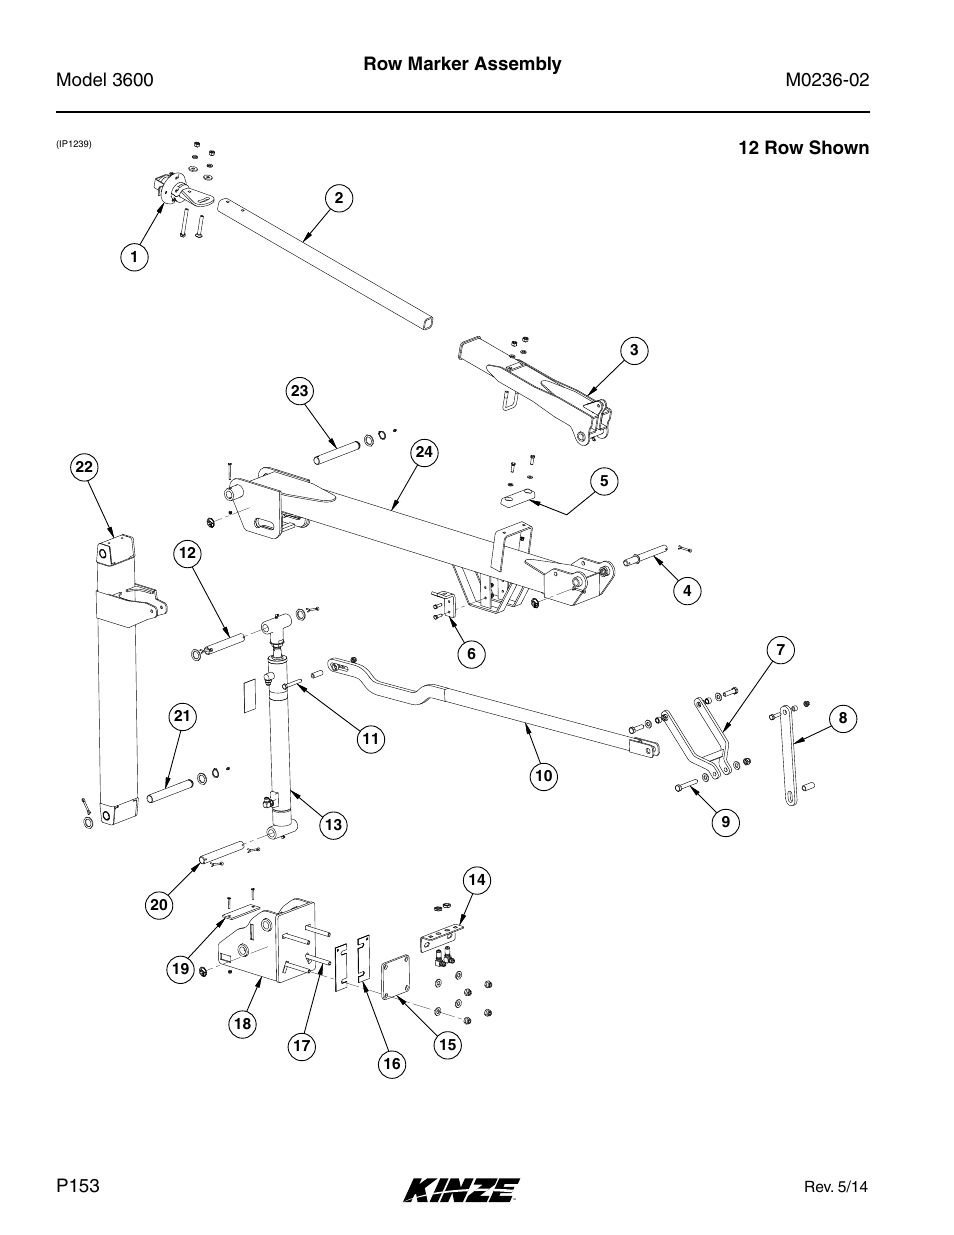 Row marker assembly | Kinze 3600 Lift and Rotate Planter Rev. 5/14 User Manual | Page 156 / 302